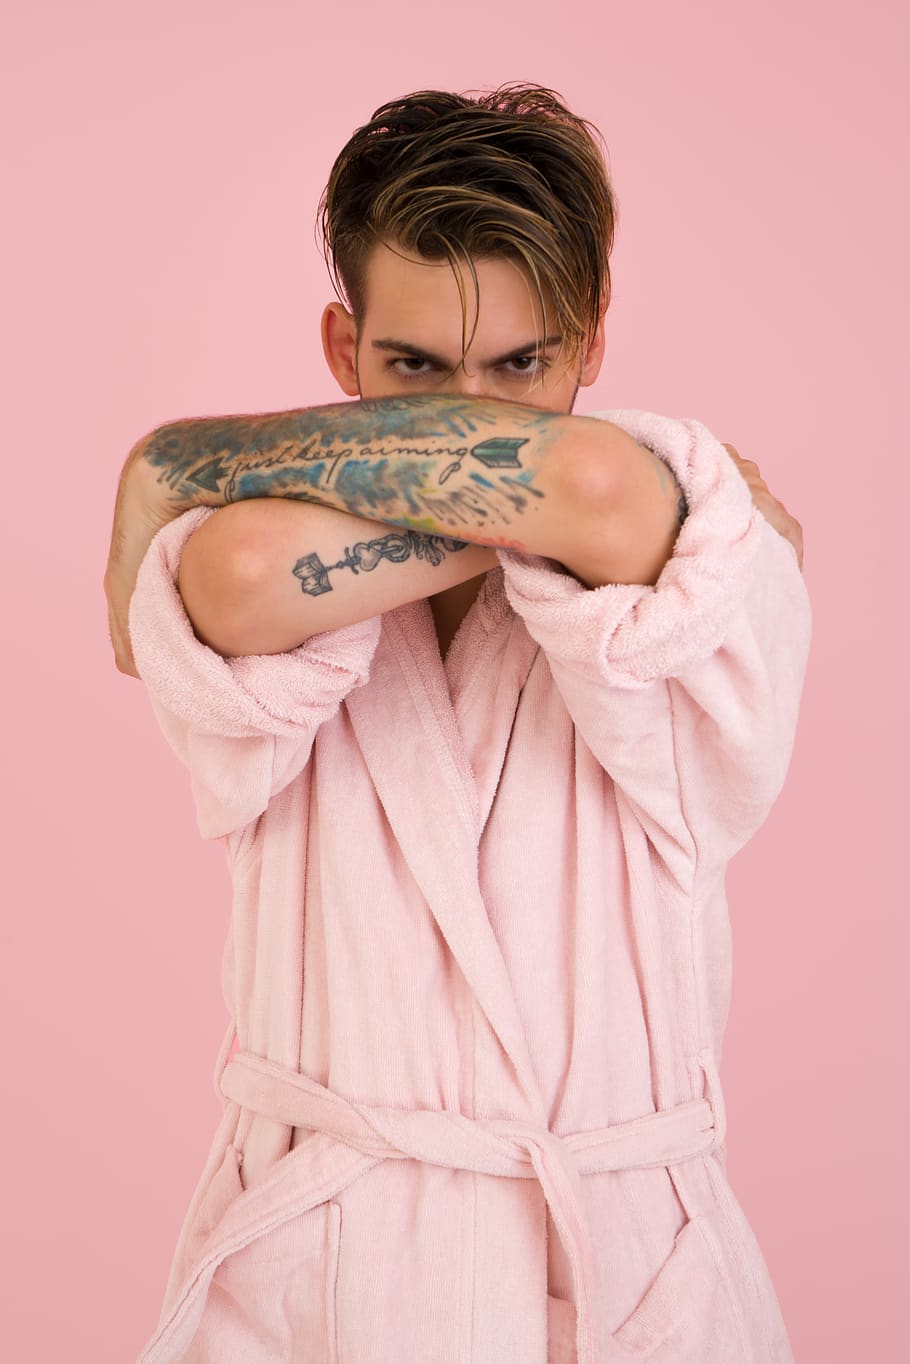 man, model, pink bathrobe, tattoo, pink background, fashion, studio shot, one person, indoors, colored background